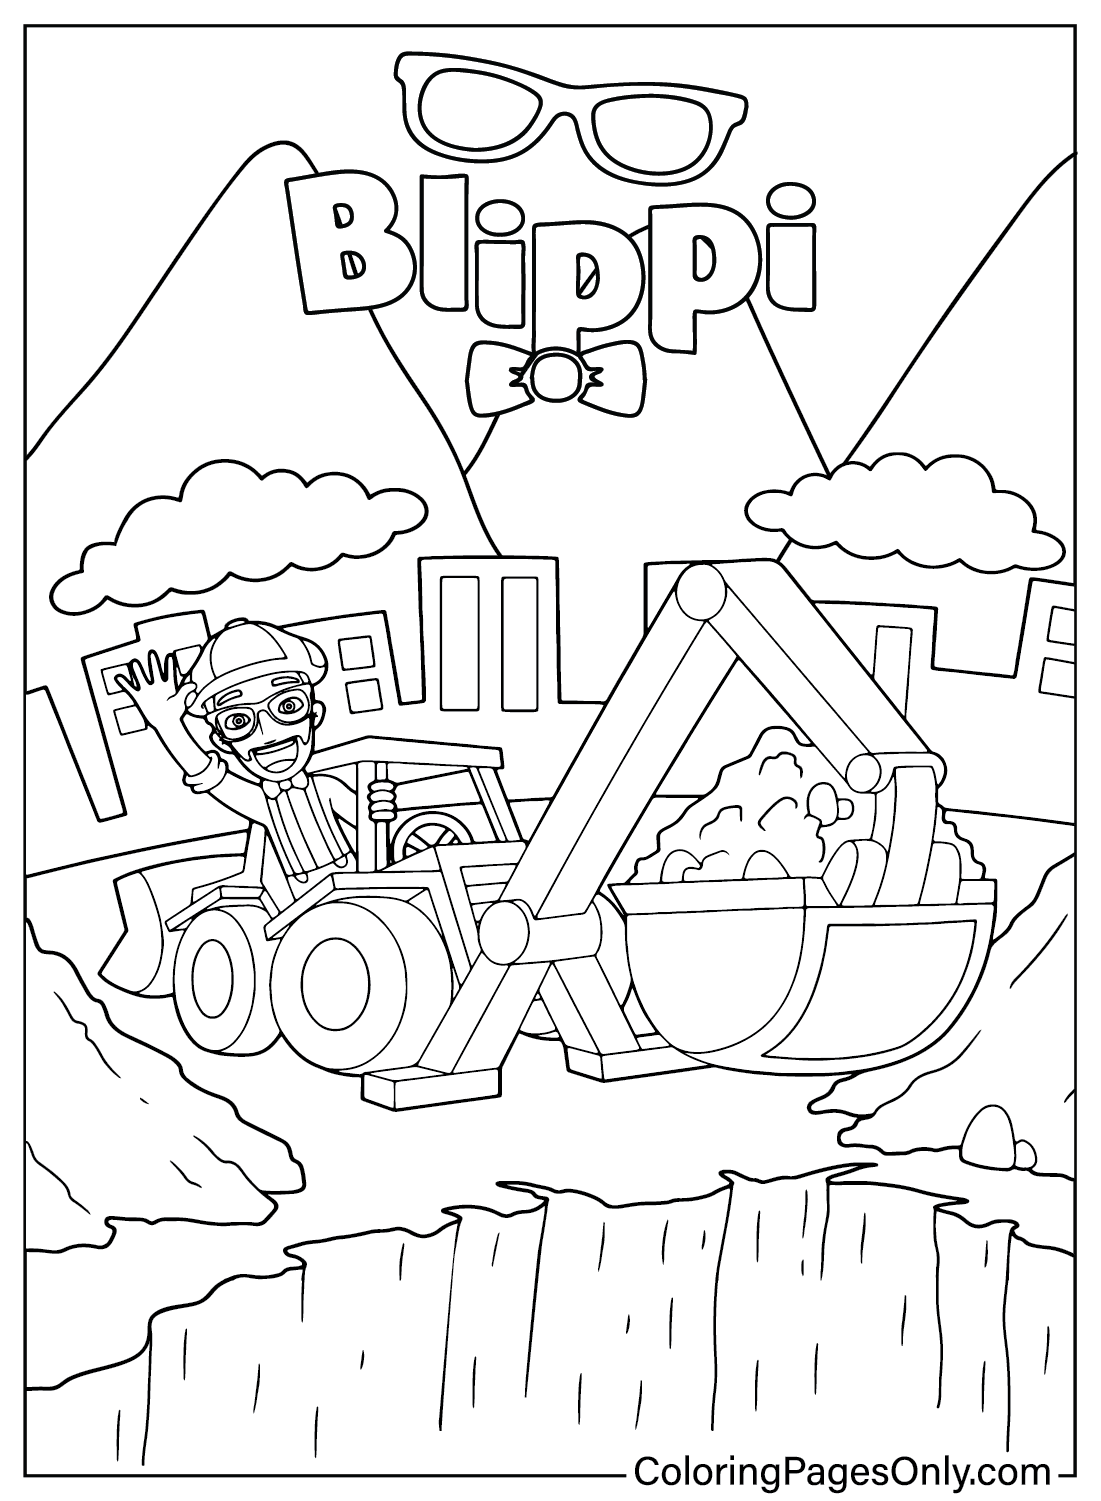 Blippi Coloring Page for Adults from Blippi